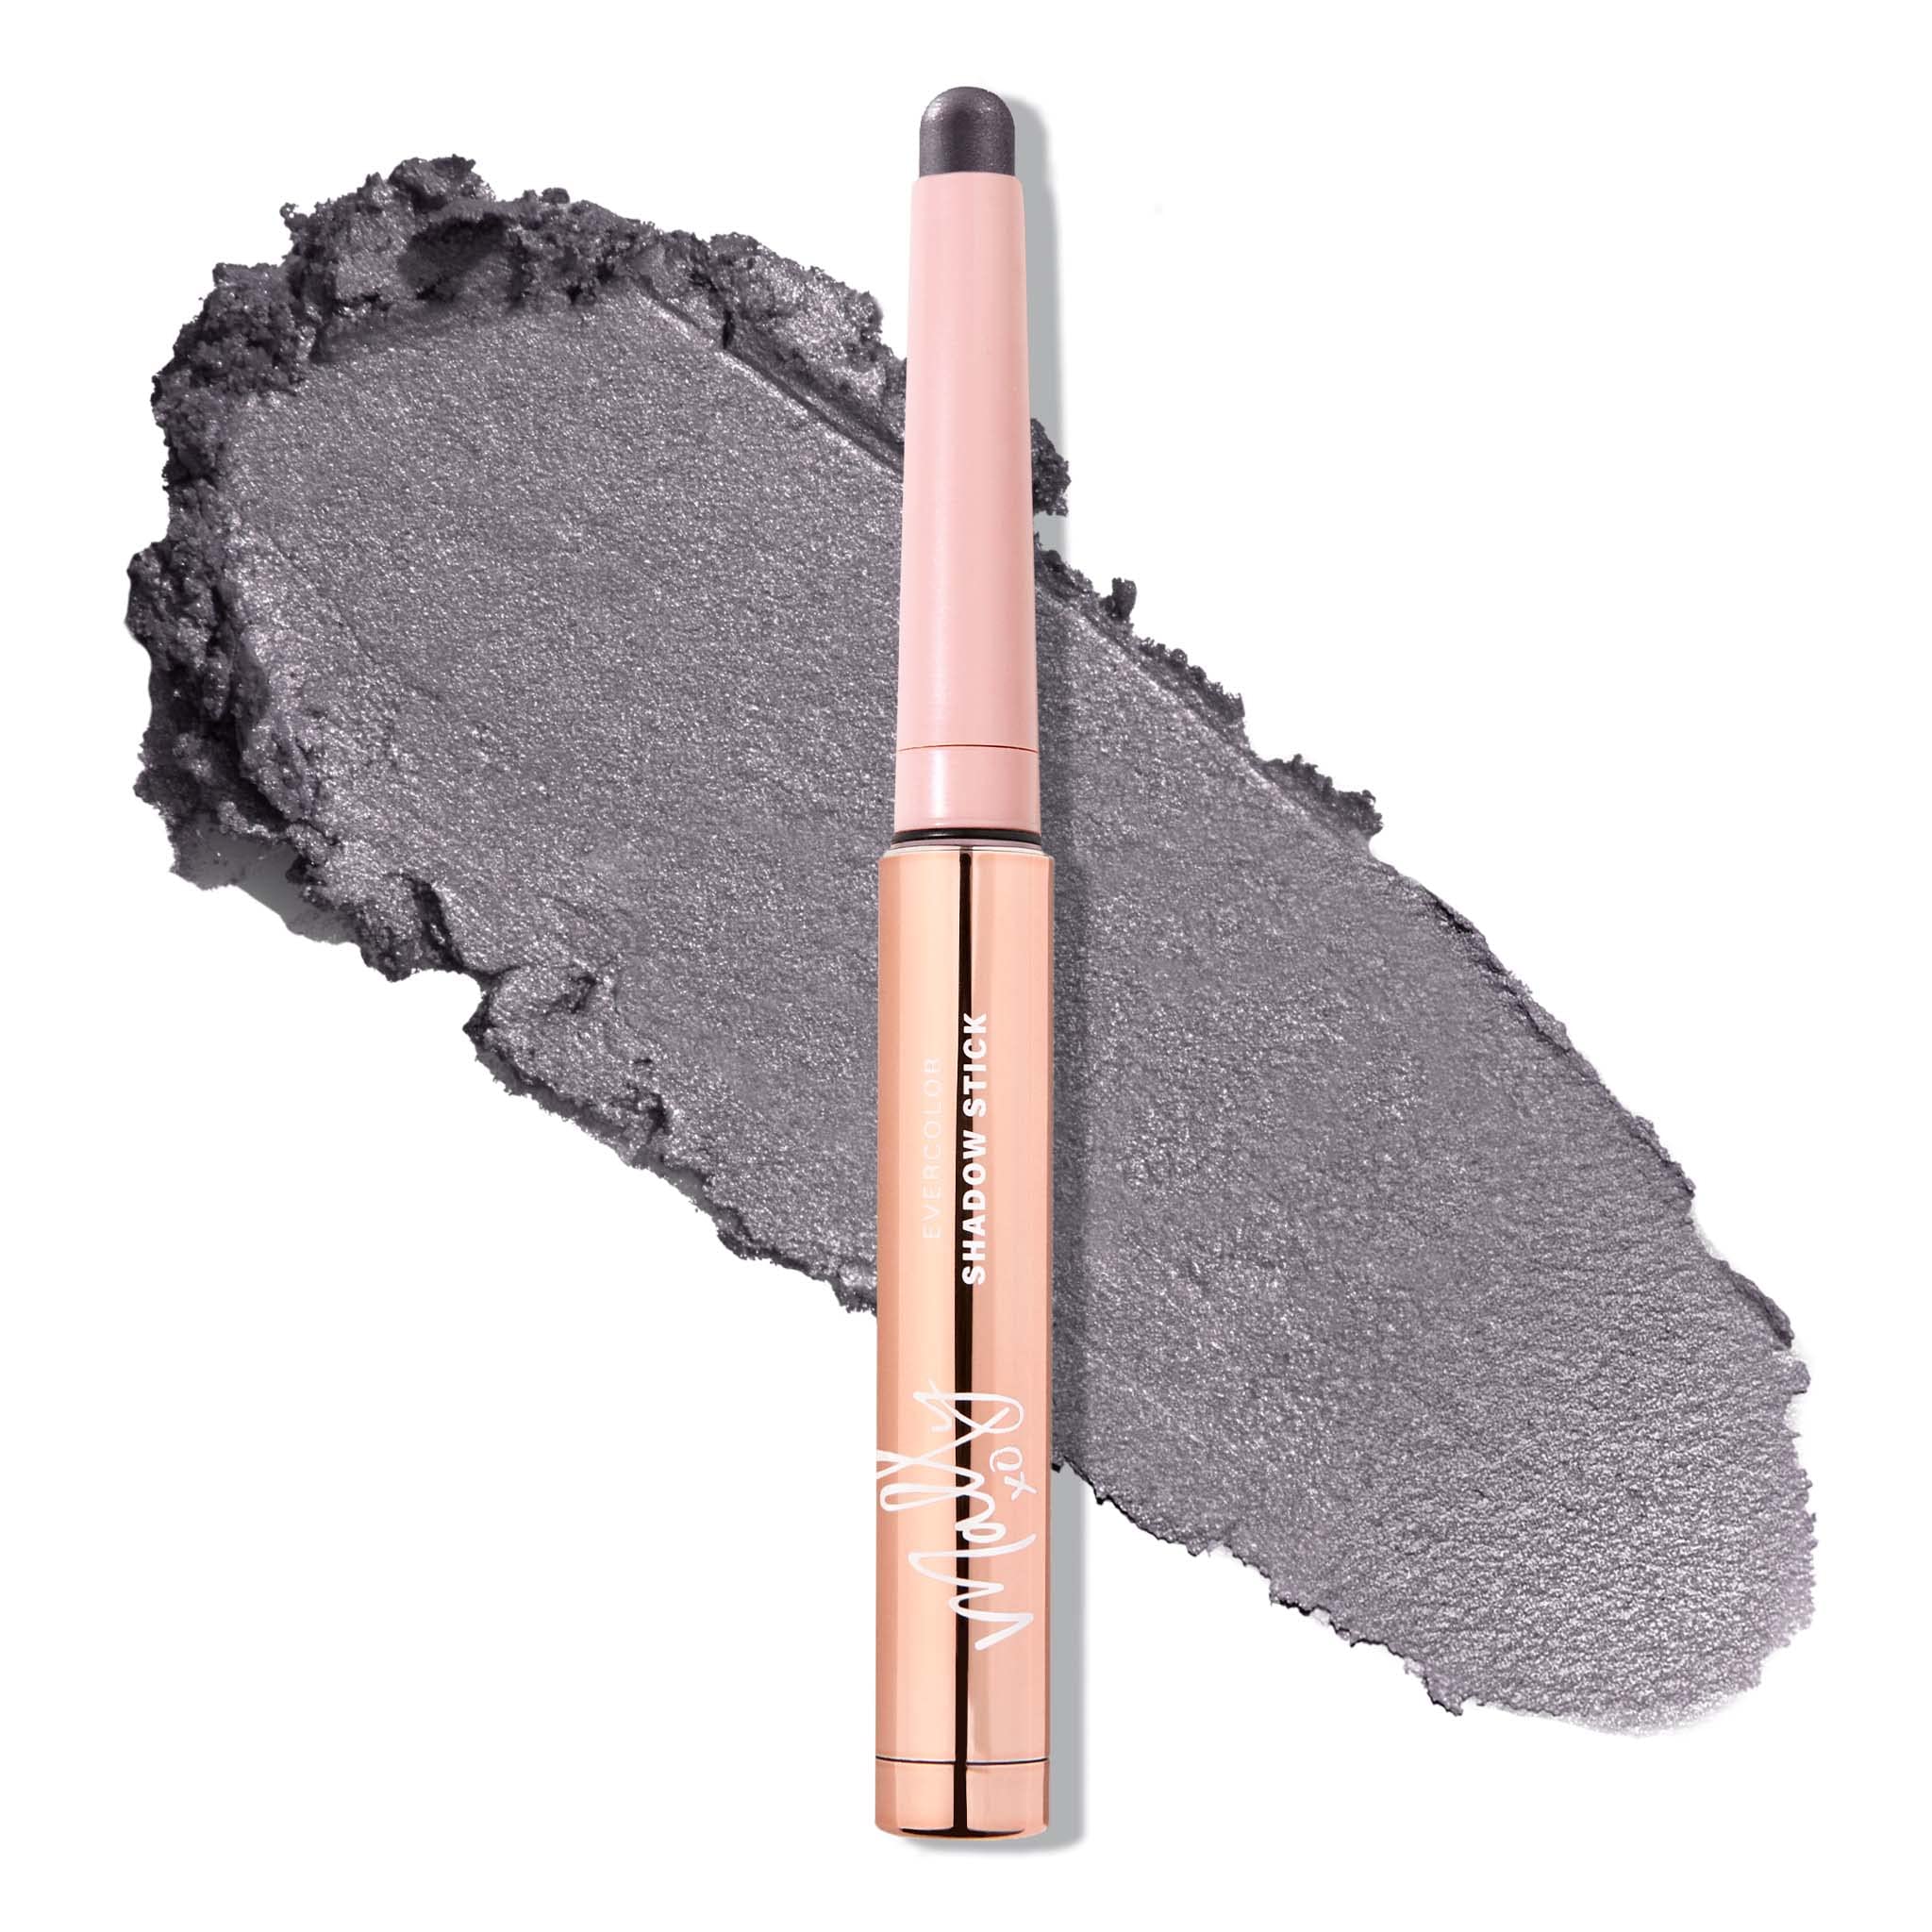 Mally Beauty Evercolor Eyeshadow Stick - Storm Shimmer - Waterproof and Crease-Proof Formula - Easy-to-Apply Buildable Color - Cream Shadow Stick